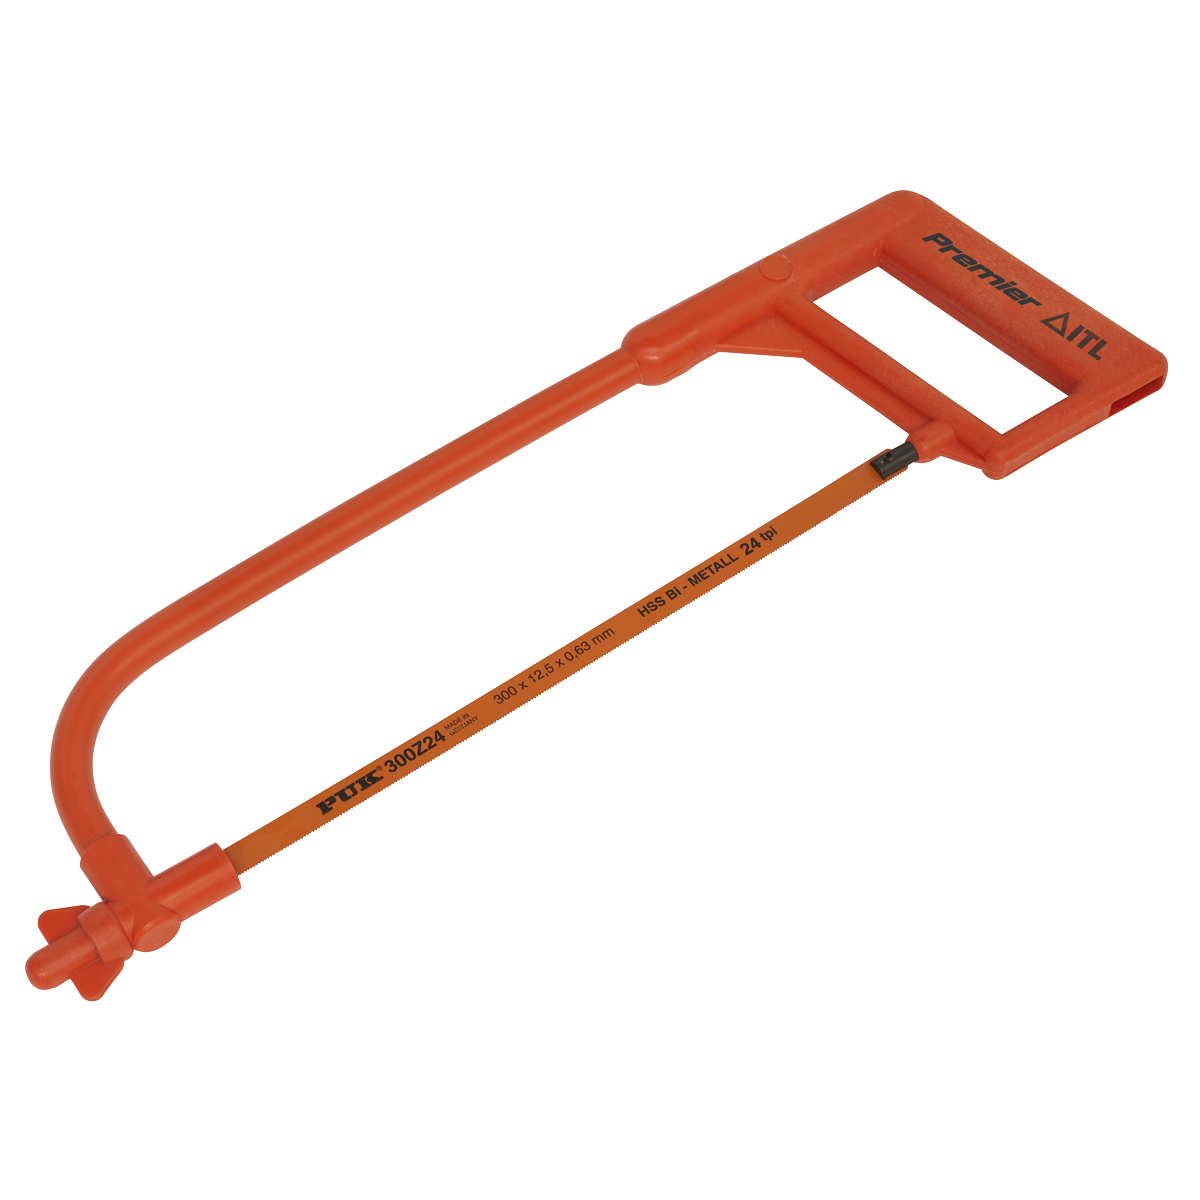 Sealey Hacksaw Professional Insulated  300mm